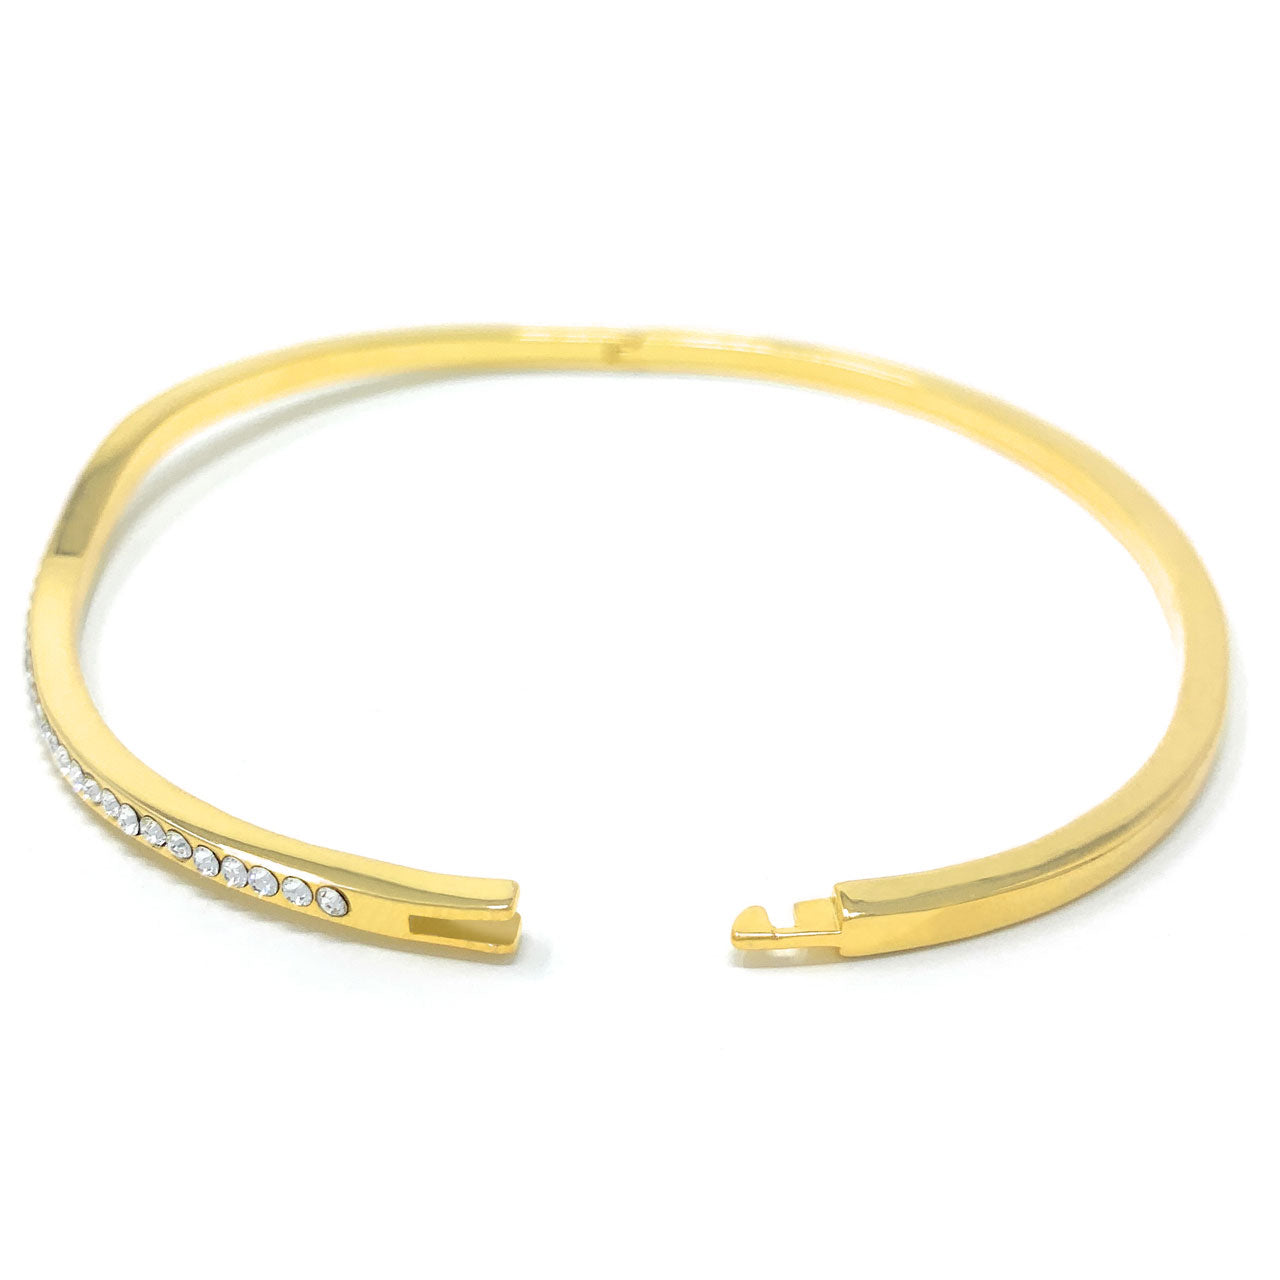 Amelia Curve Pave Bangle Bracelet with White Clear Round Crystals from Swarovski Gold Plated - Ed Heart